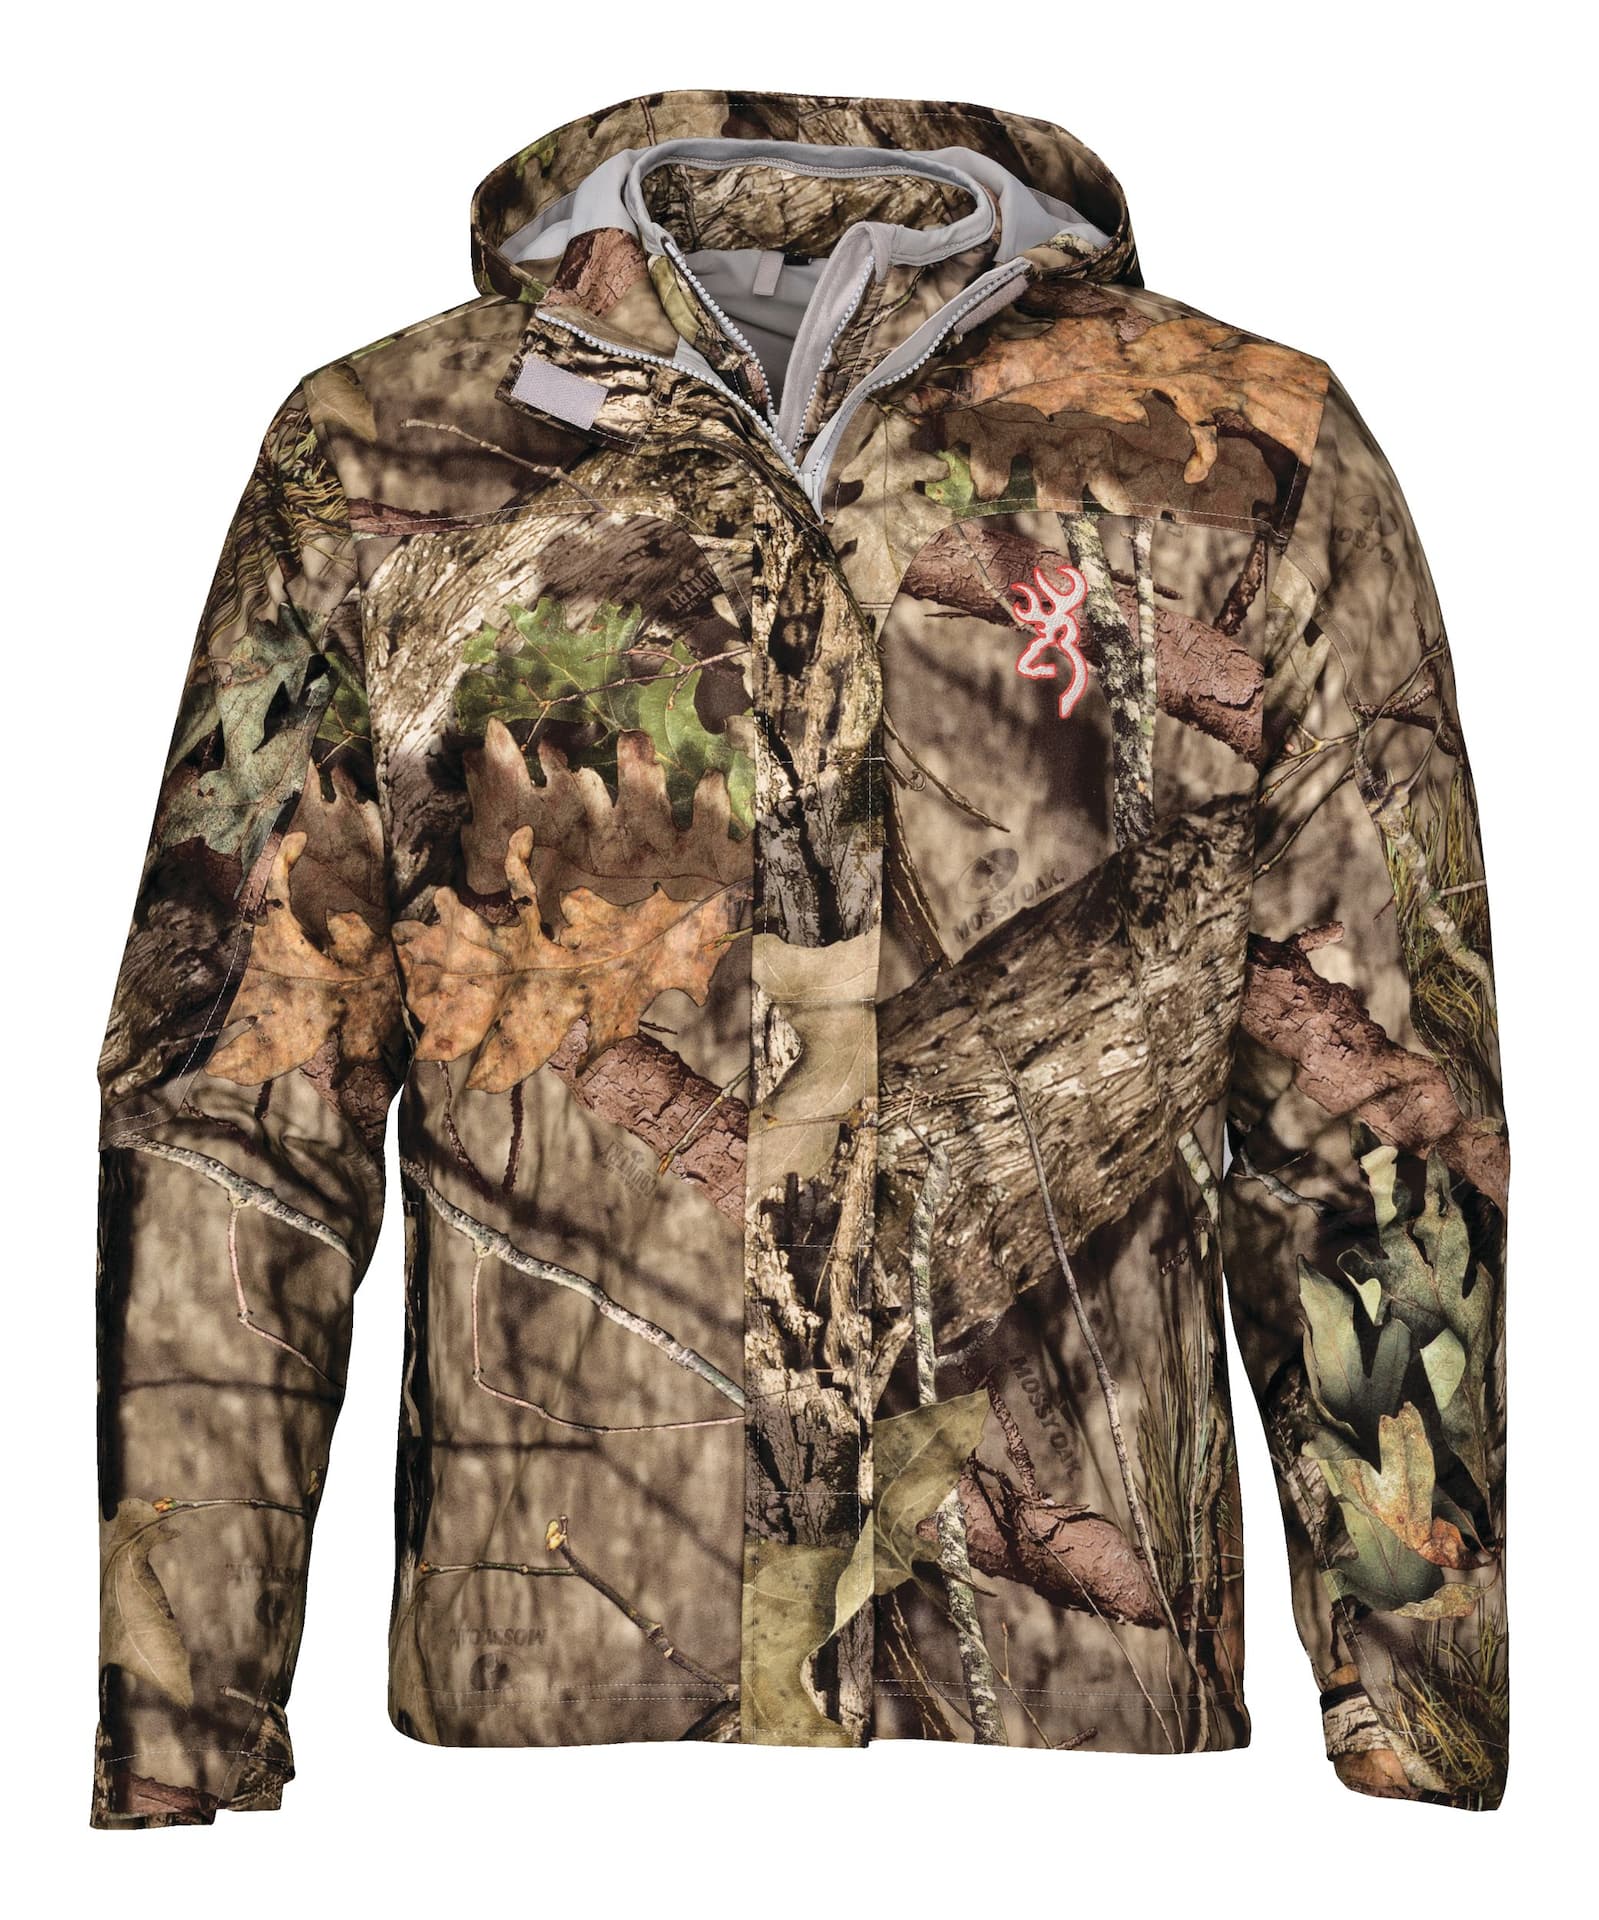 https://media-www.canadiantire.ca/product/playing/hunting/hunting-apparel-footwear/1759608/browning-jacket-3-in-1-mossy-oak-m-35b3fc69-7c17-4d8d-8f16-f247d5b6508b-jpgrendition.jpg